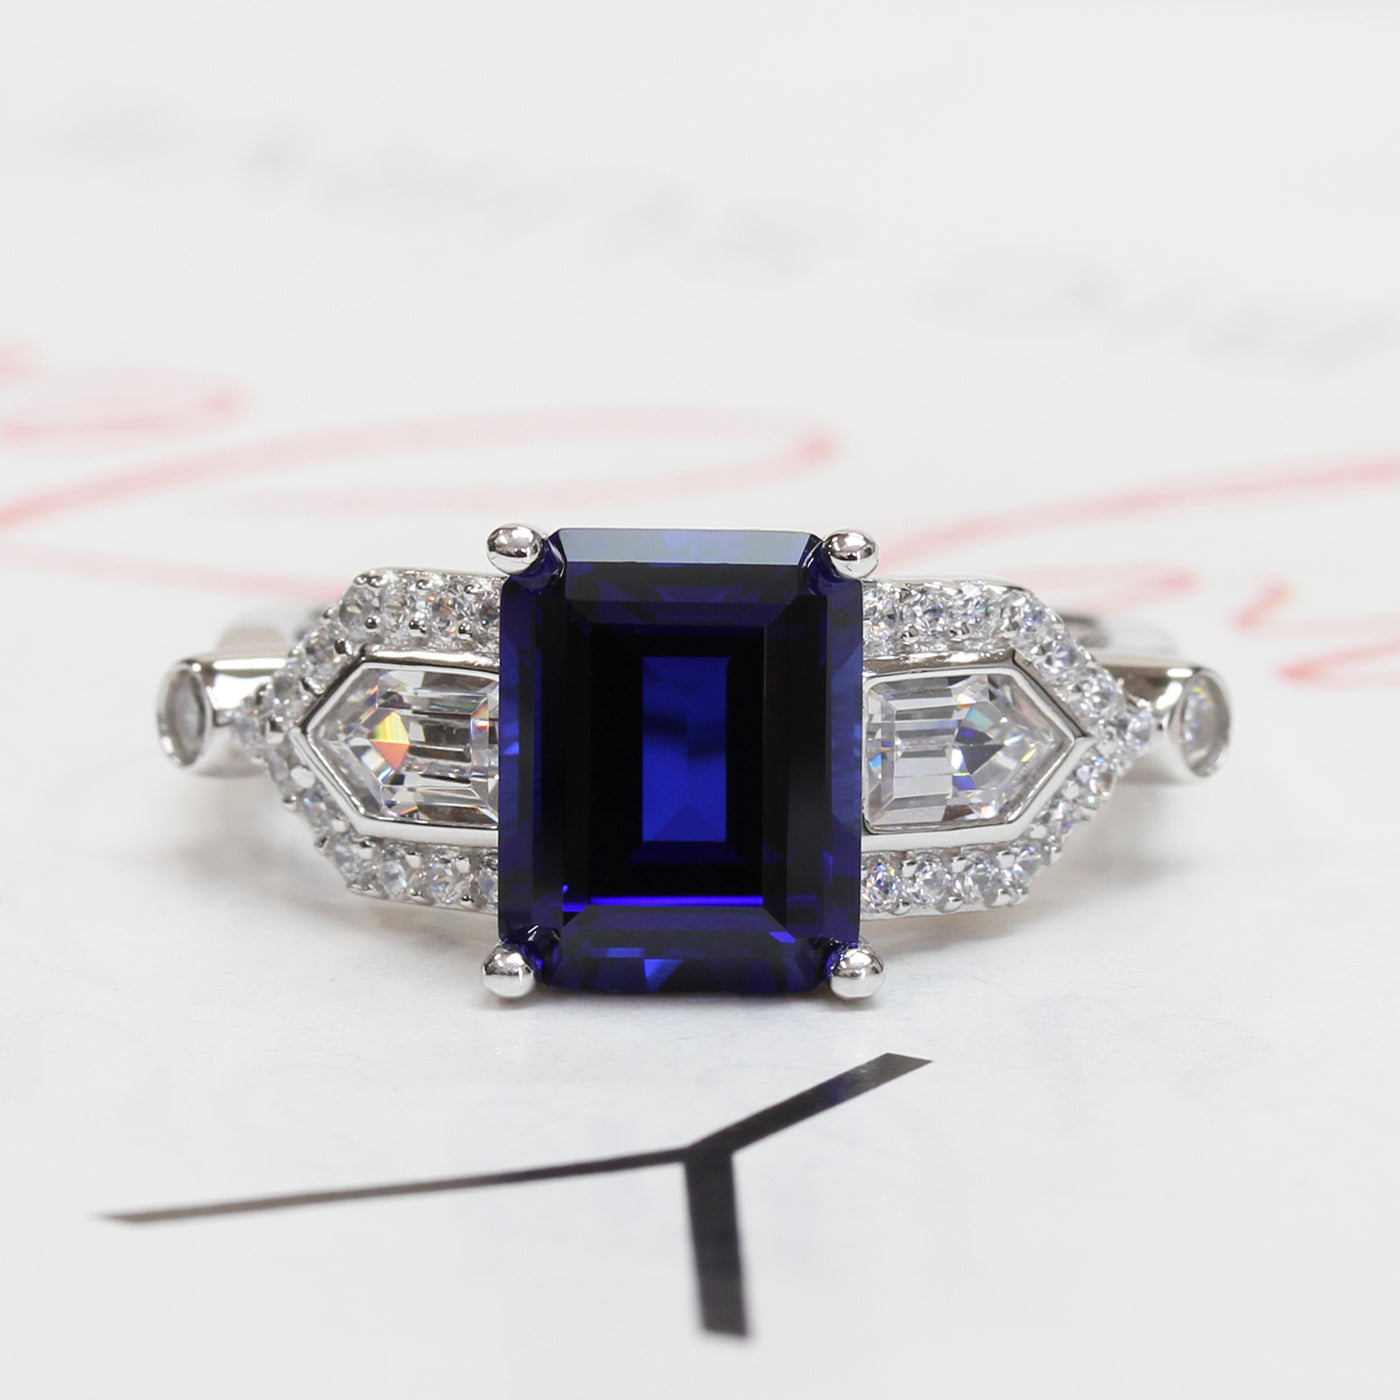 Emerald Cut 2.5 CT Simulated Blue Sapphire Ring, Platinum Plated Sterling Silver